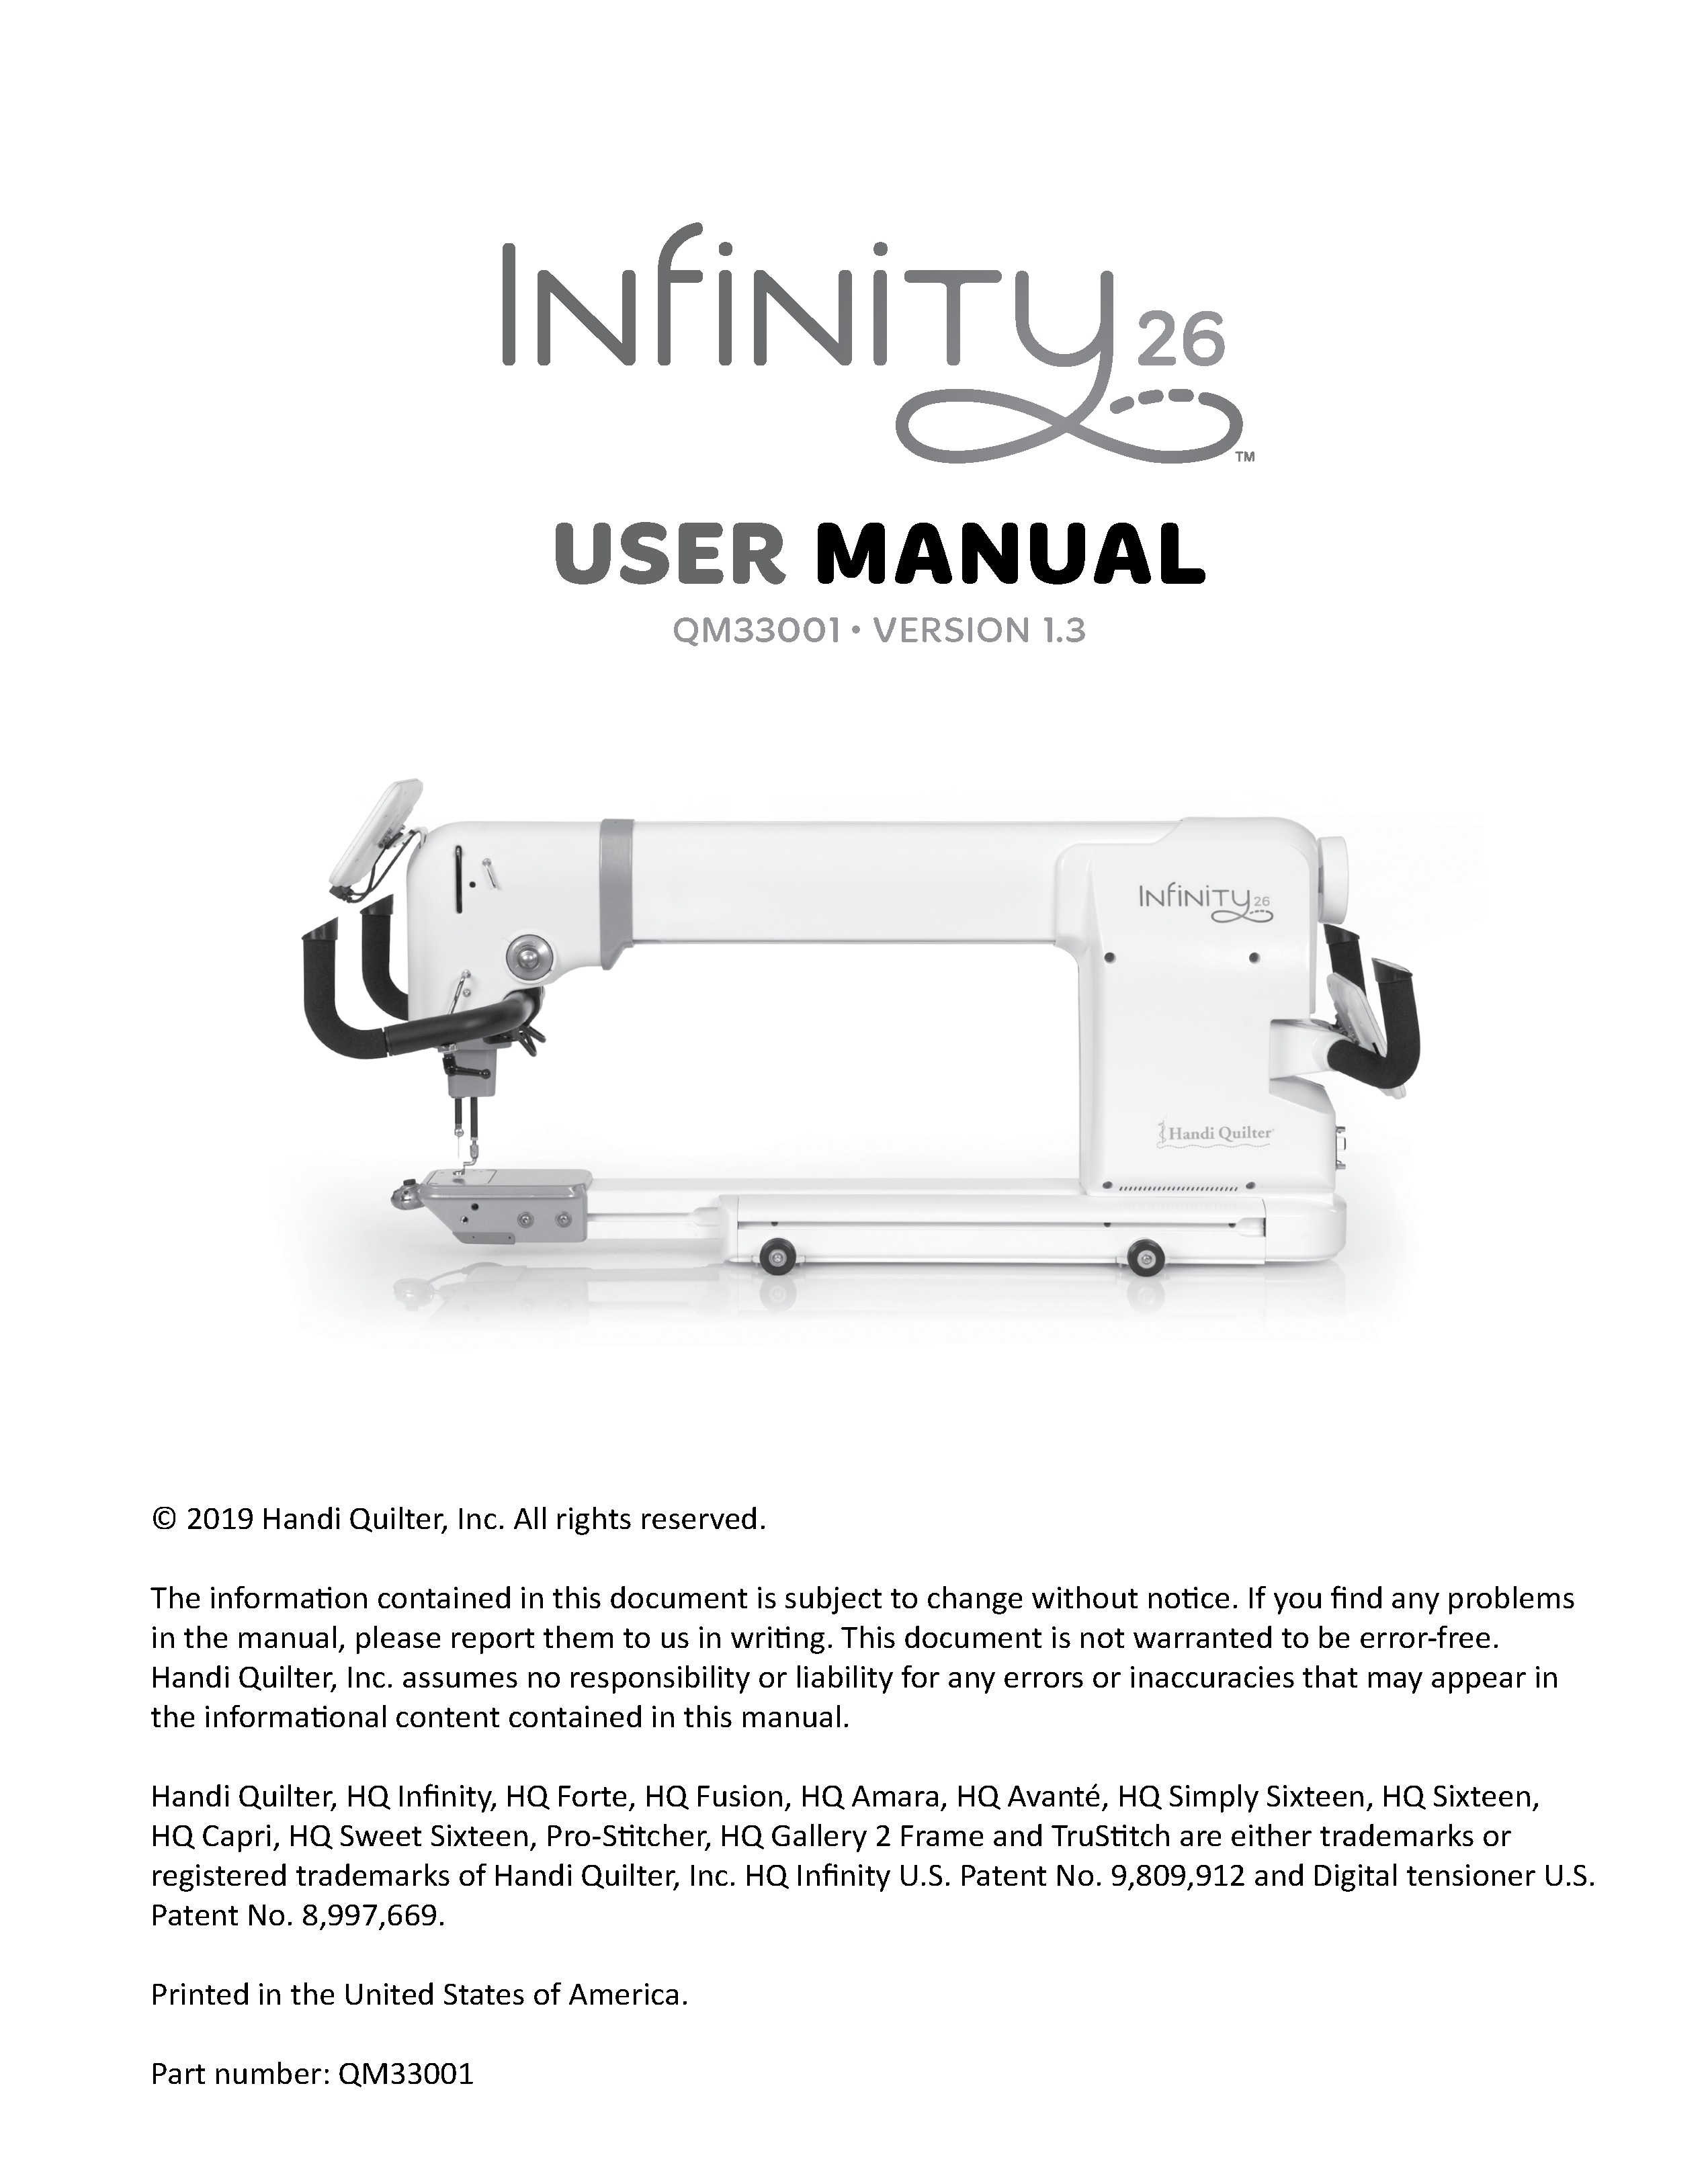 QM33001-HQ-Infinity-User-manual-version-1.4-ALL-Web-1_Page_02.png